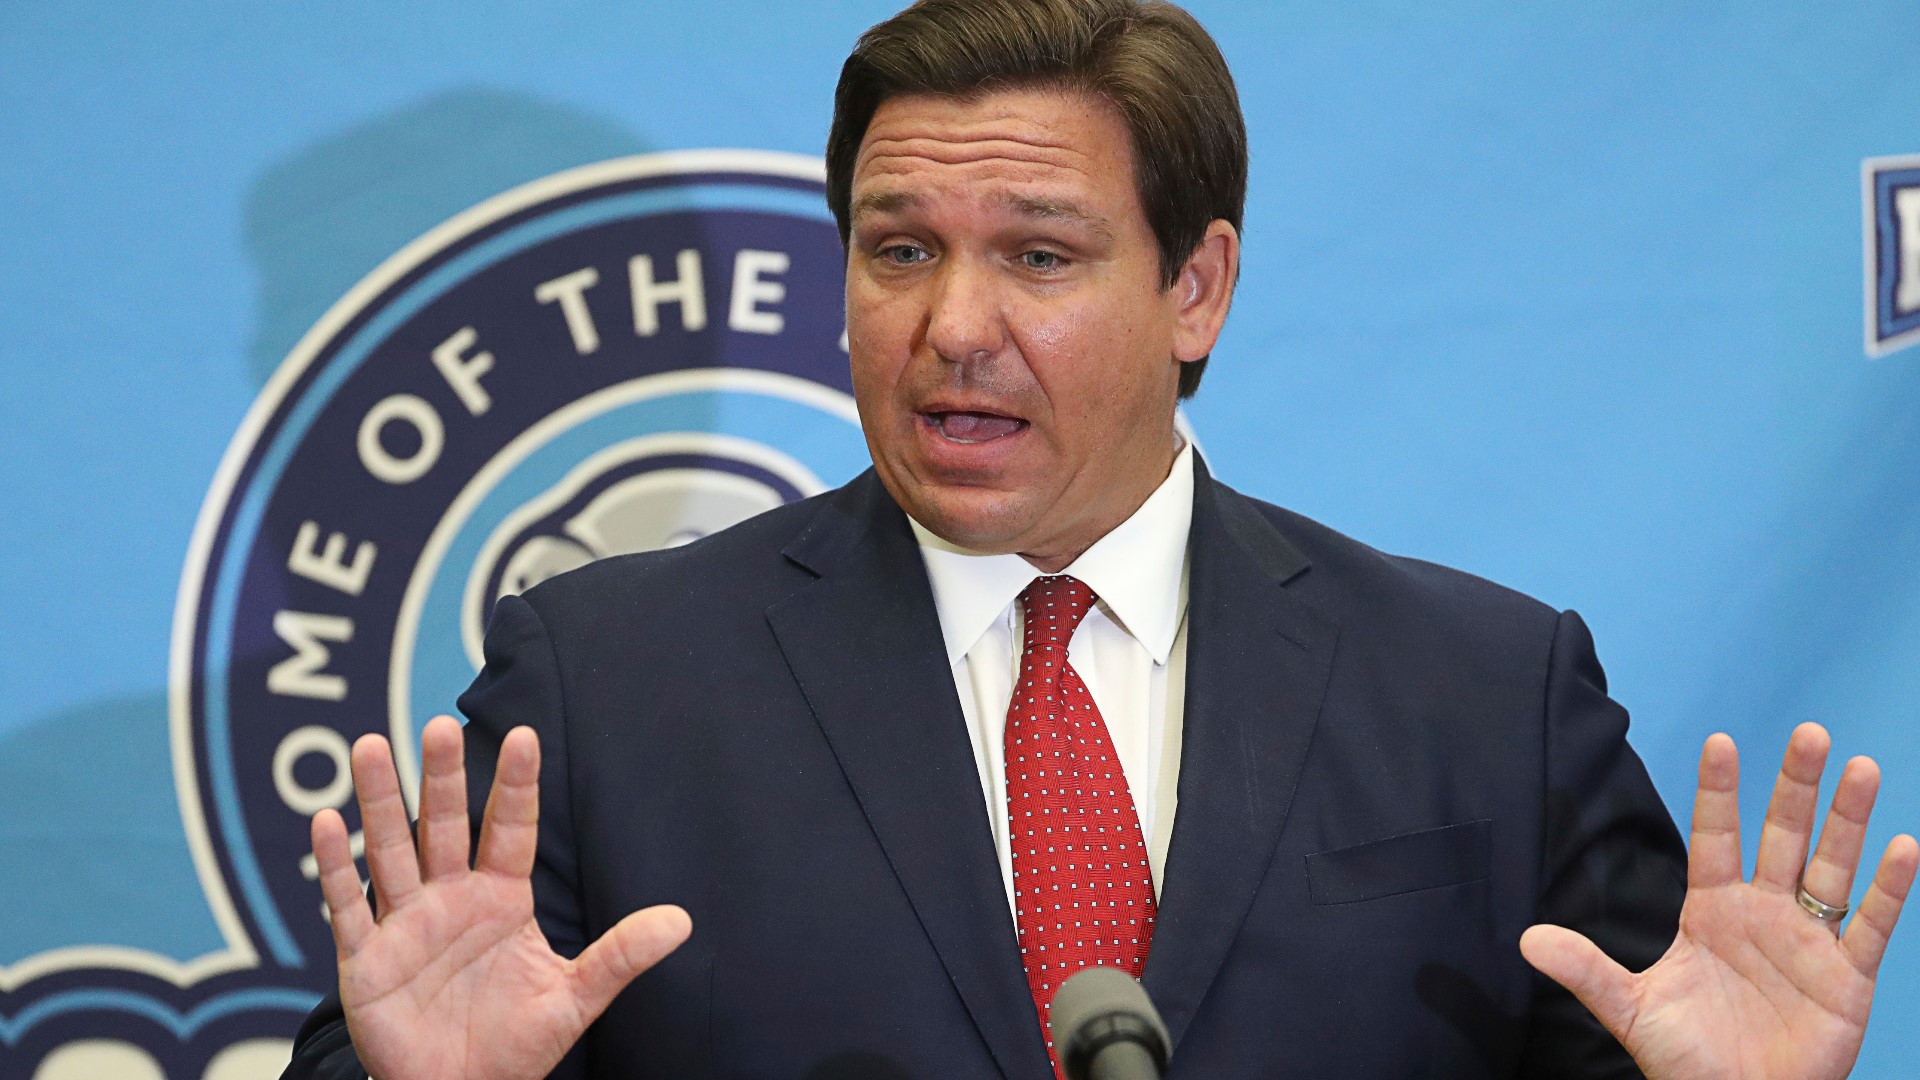 The Orlando Sentinel and the South Florida Sun-Sentinel are suing Gov. Ron DeSantis and his office.